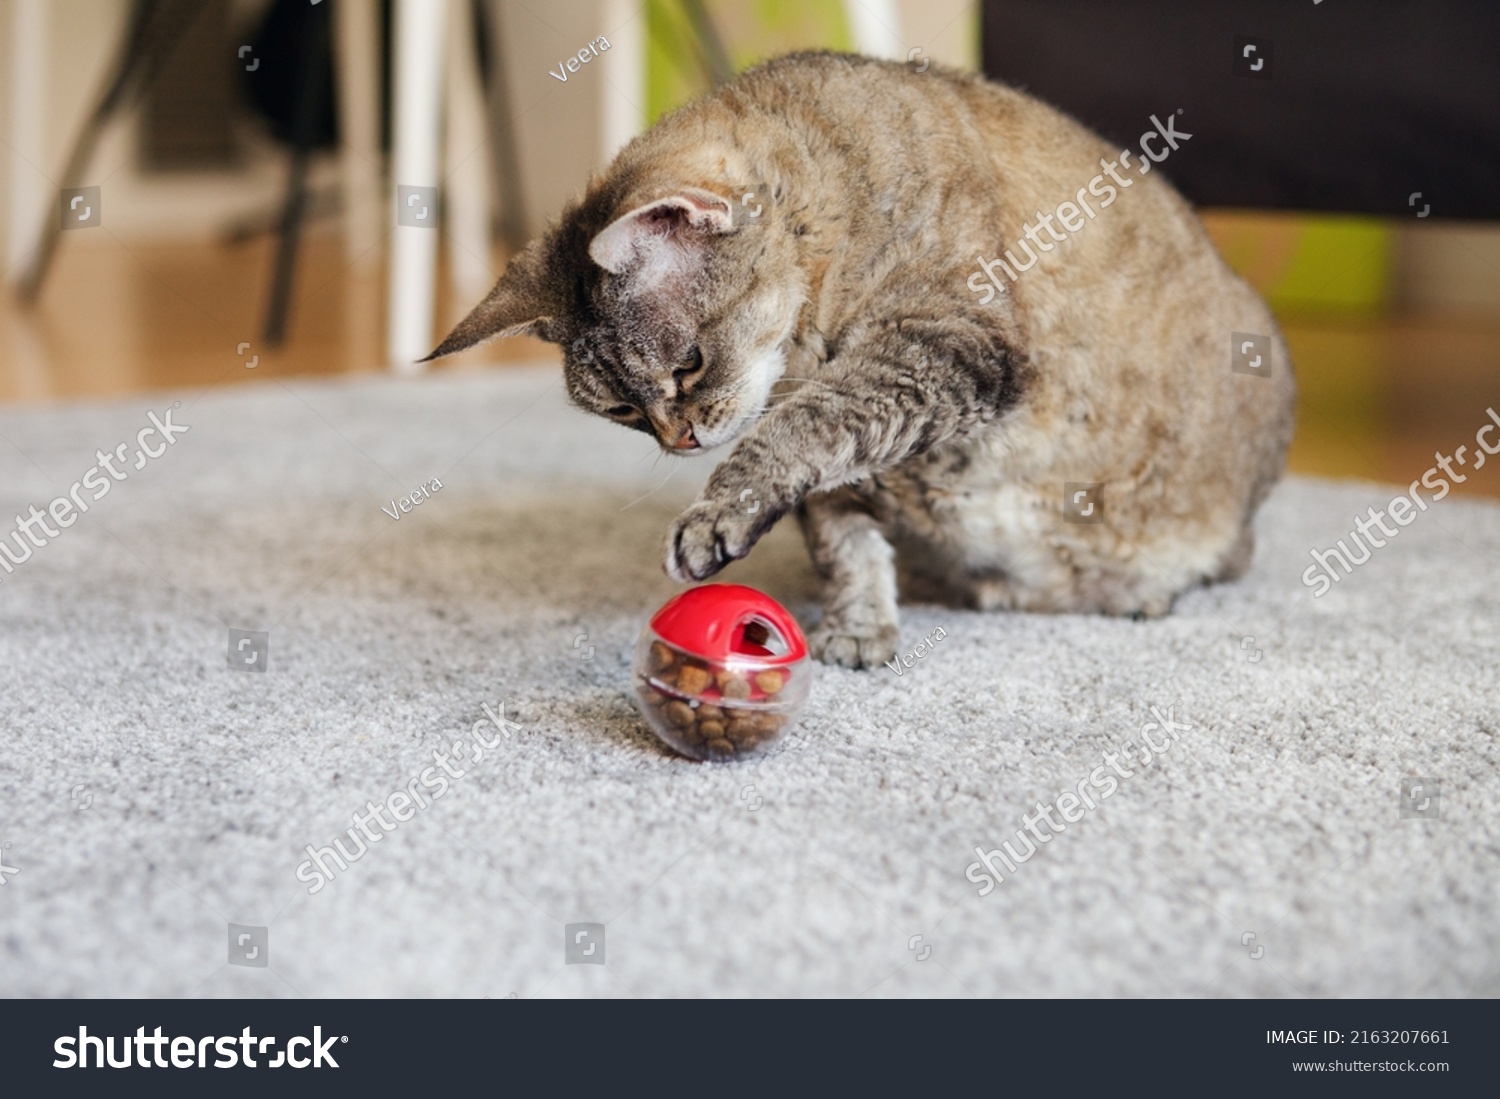 Fat tabby cat is playing, pushing   with a paw slow feeder ball with dry food inside, trying to take out a crunch. Playful kitty having fun with a challenging toy. Active mature feline. #2163207661